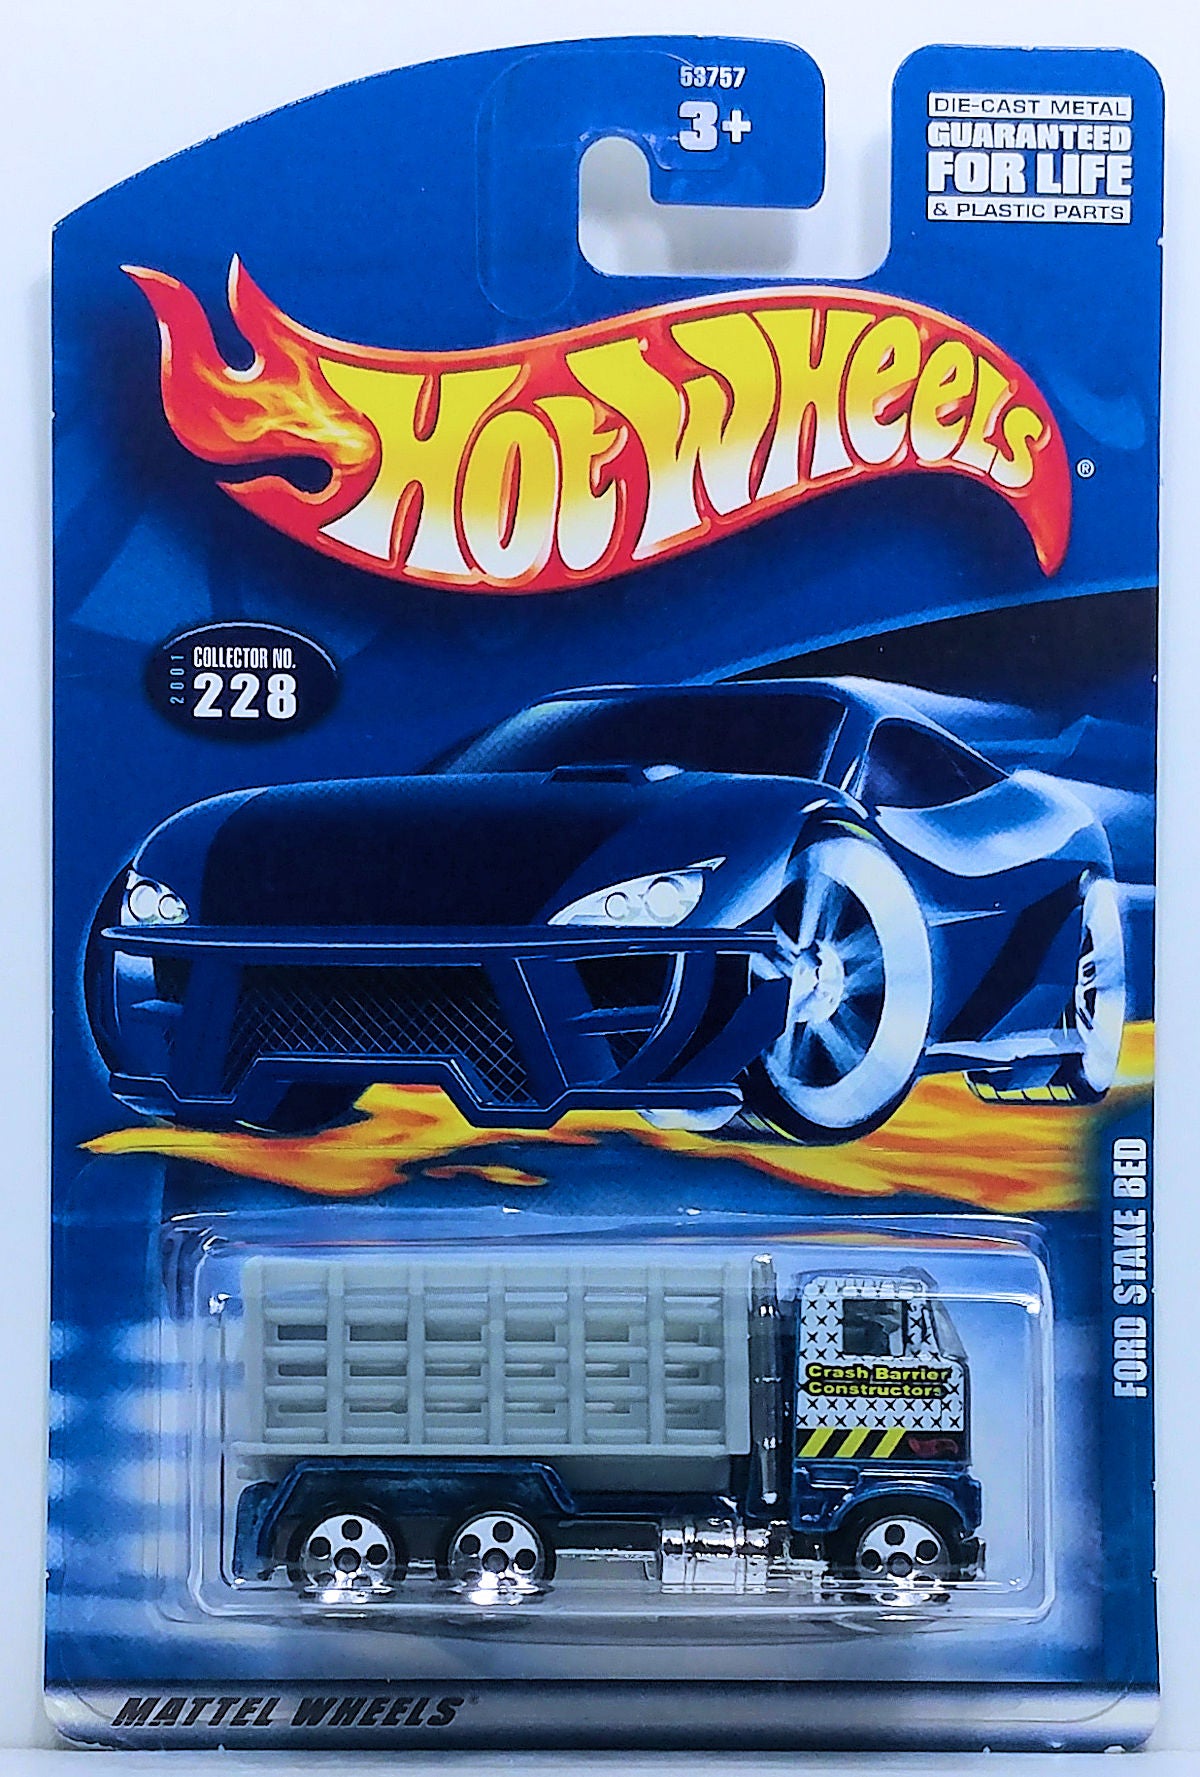 Hot Wheels 2001 - Collector # 228/240 - Ford Stake Bed - Metallic Dark Blue - USA Card